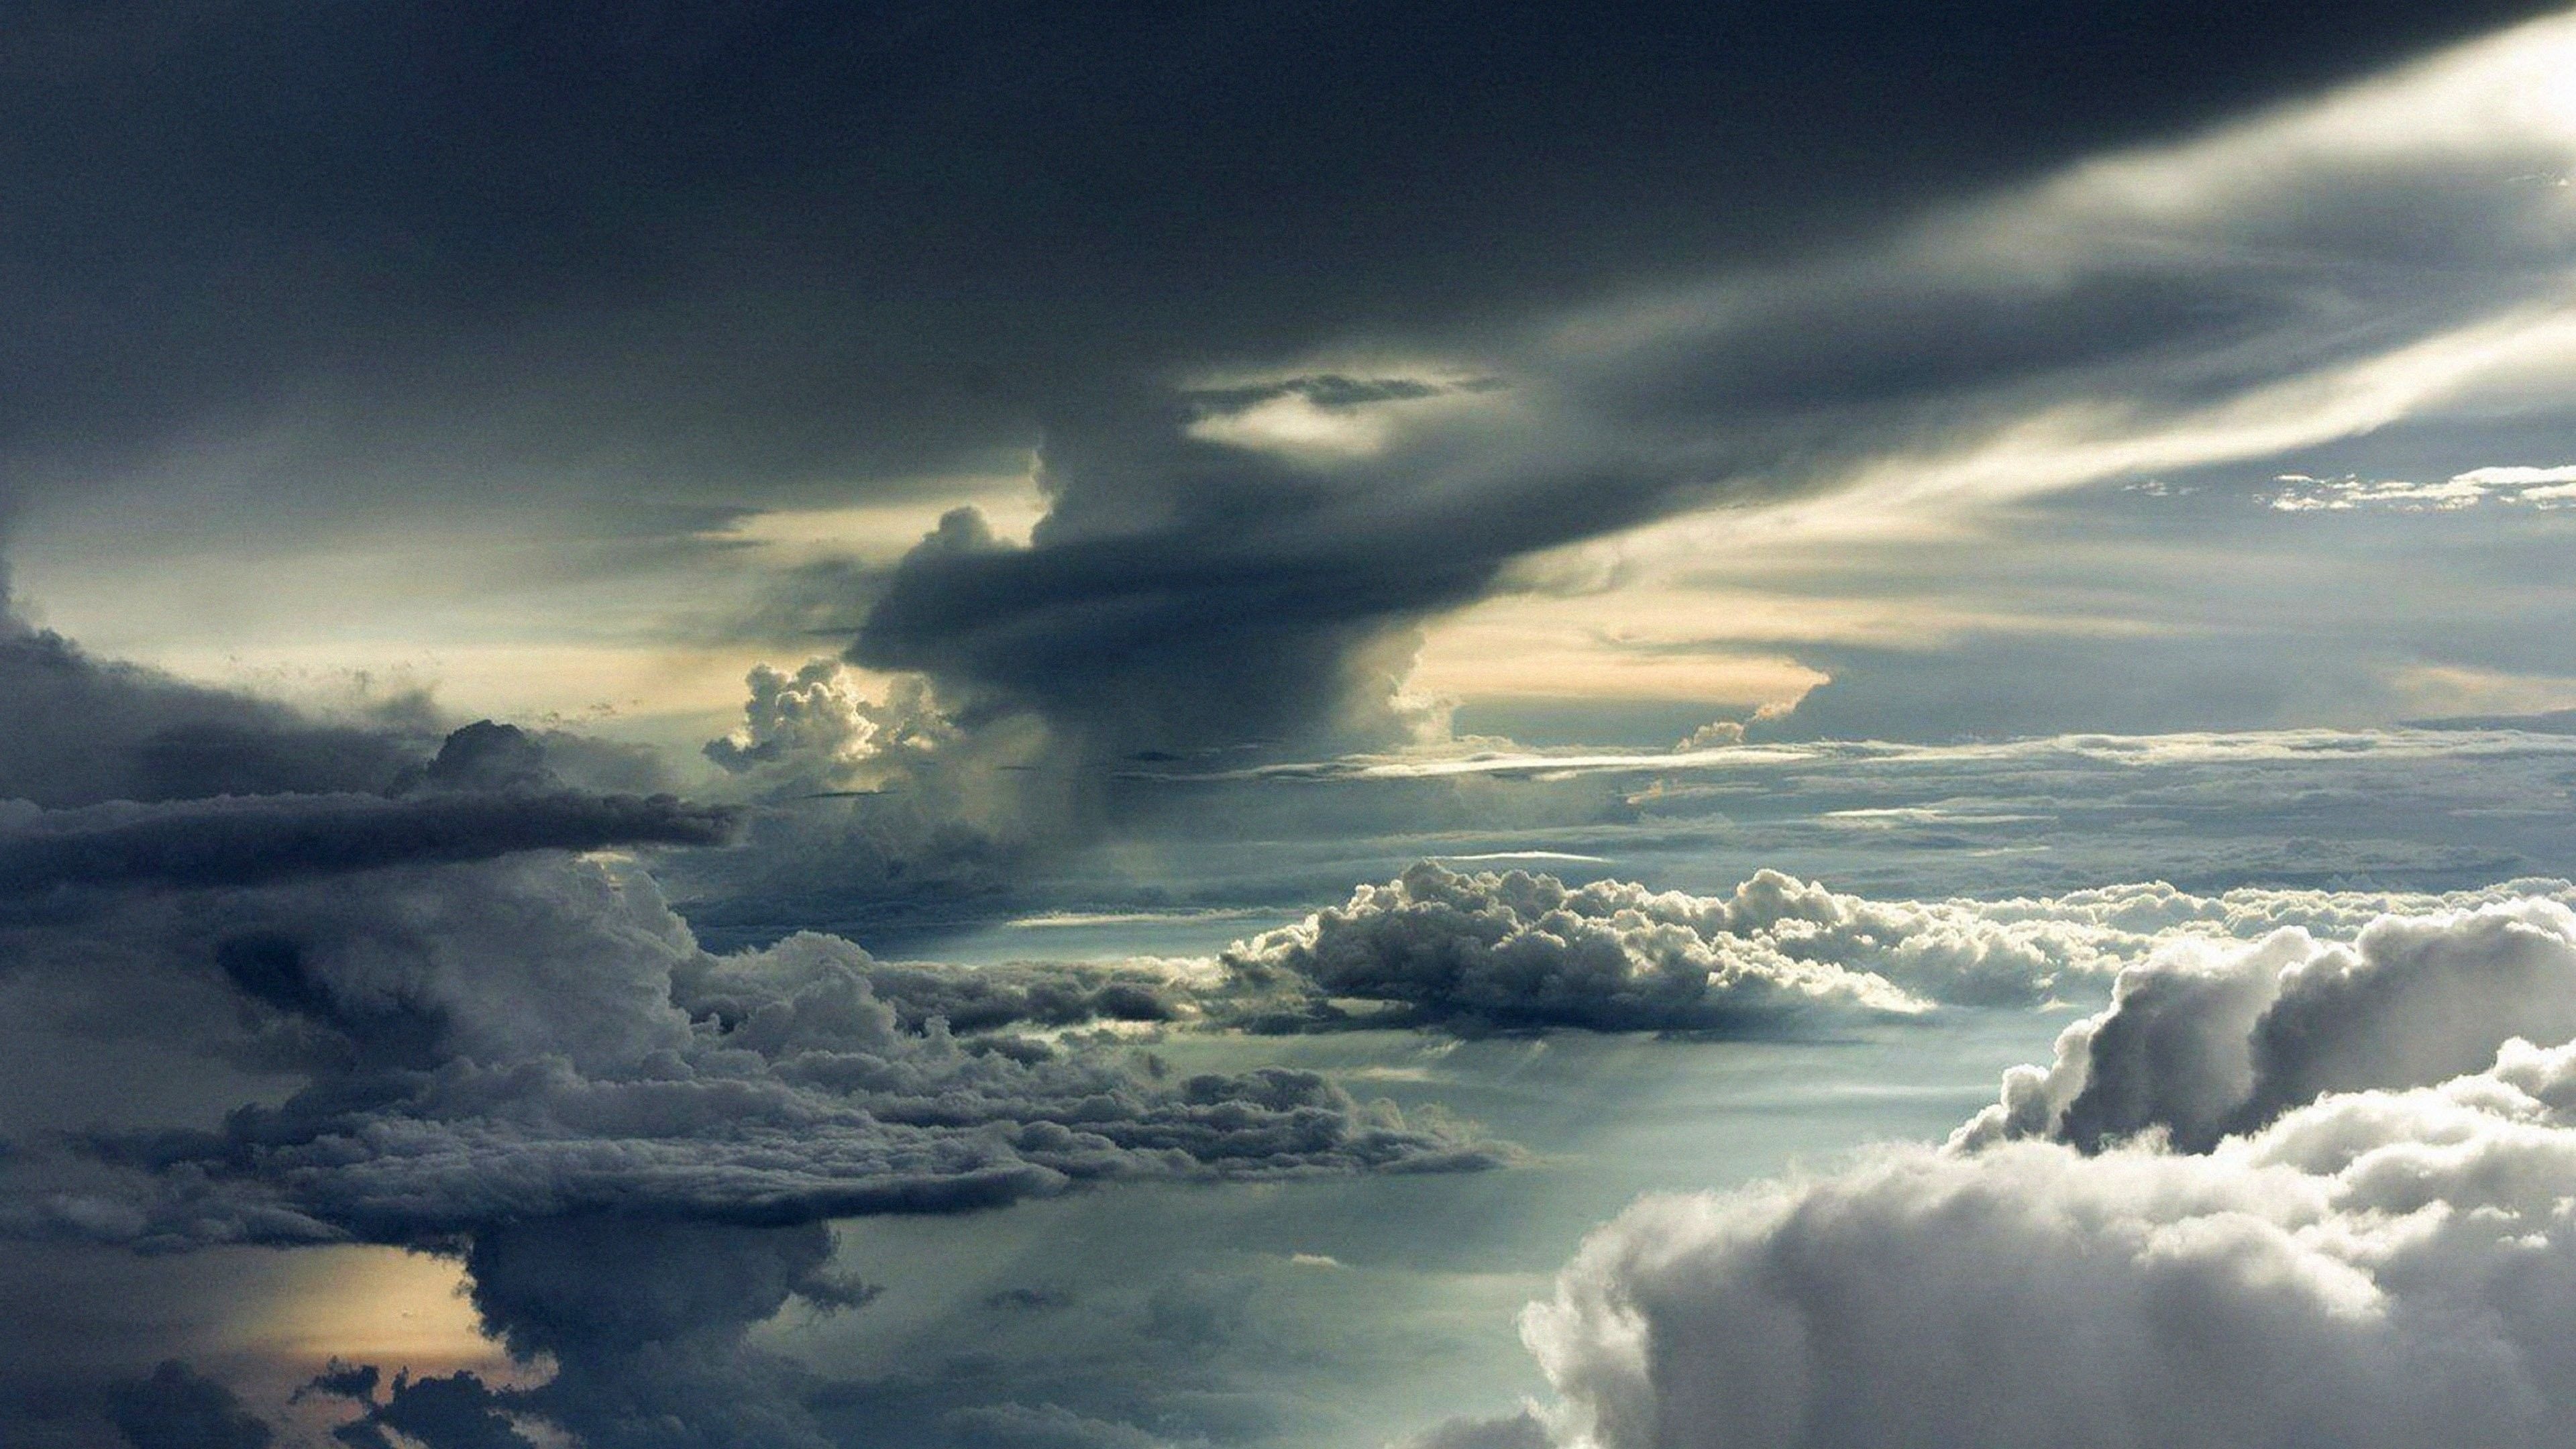 Gray Cloudy Sky: The formation of clouds, Cumulonimbus, A visible mass of condensed watery vapor. 3840x2160 4K Wallpaper.